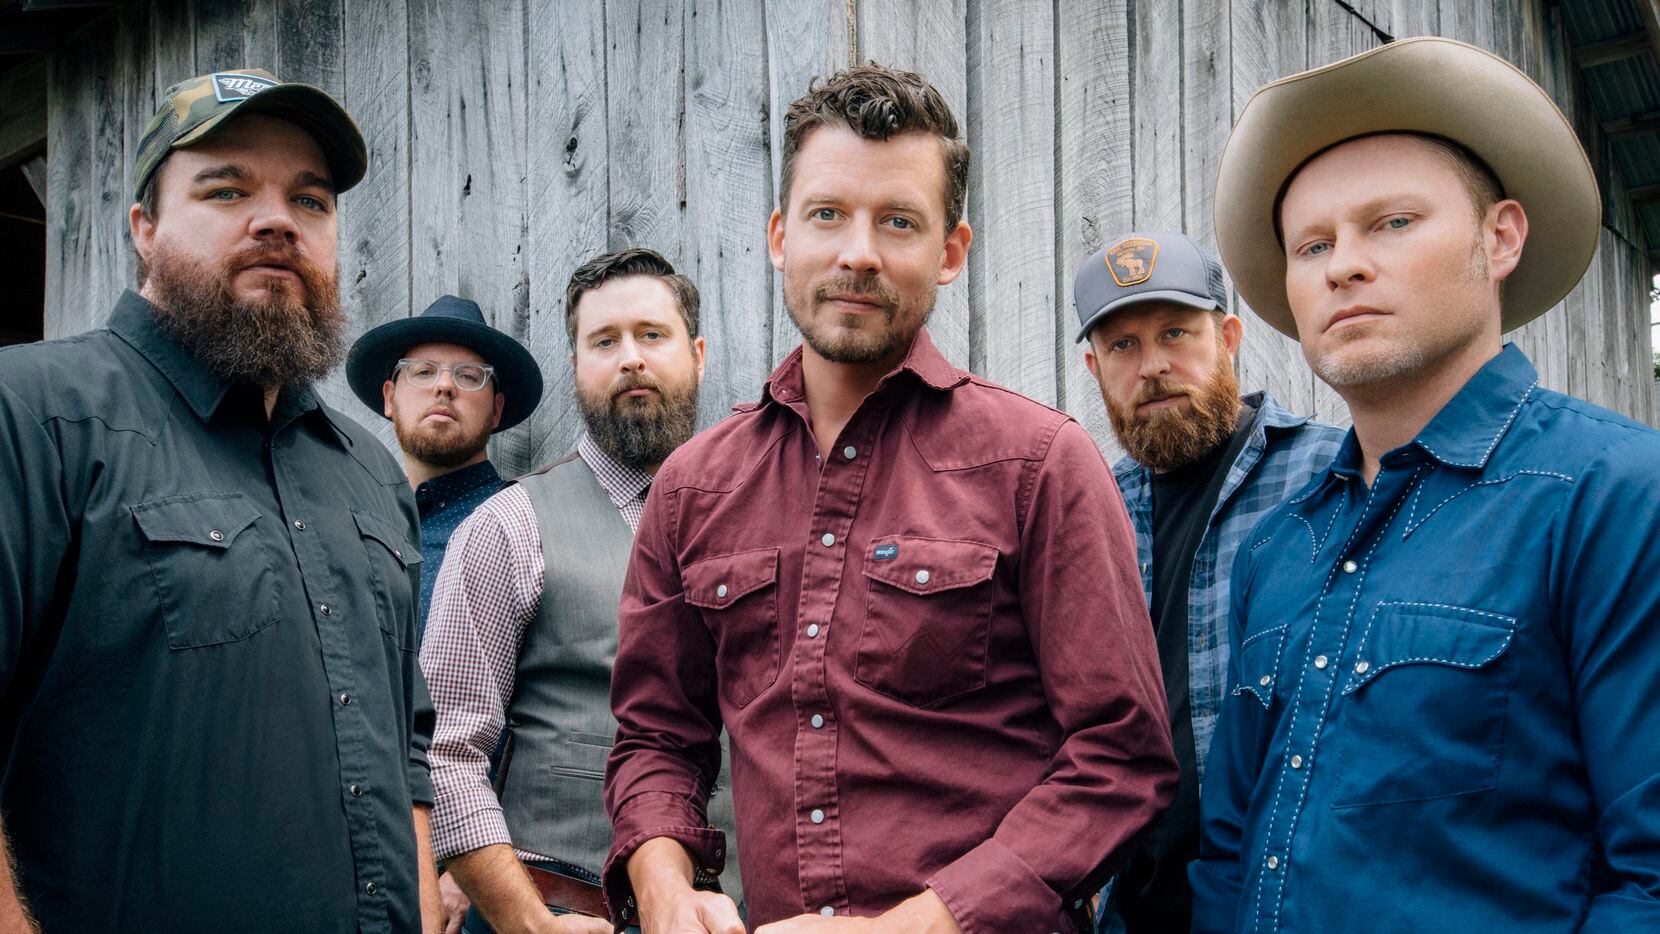 The Turnpike Troubadours, who announced an indefinite hiatus in May 2019, are ready to perform again.